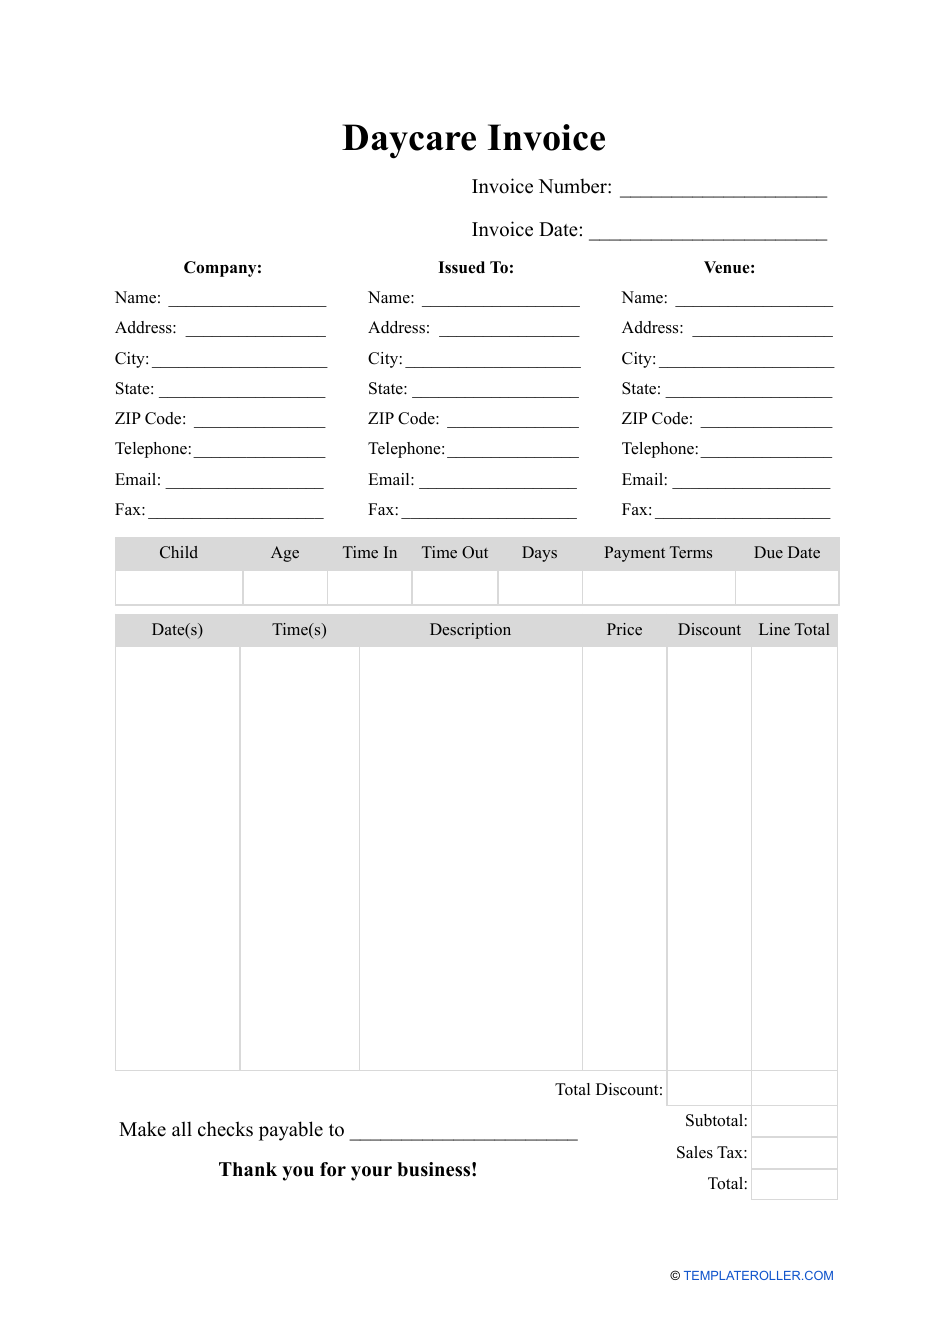 Daycare Invoice Template, Page 1